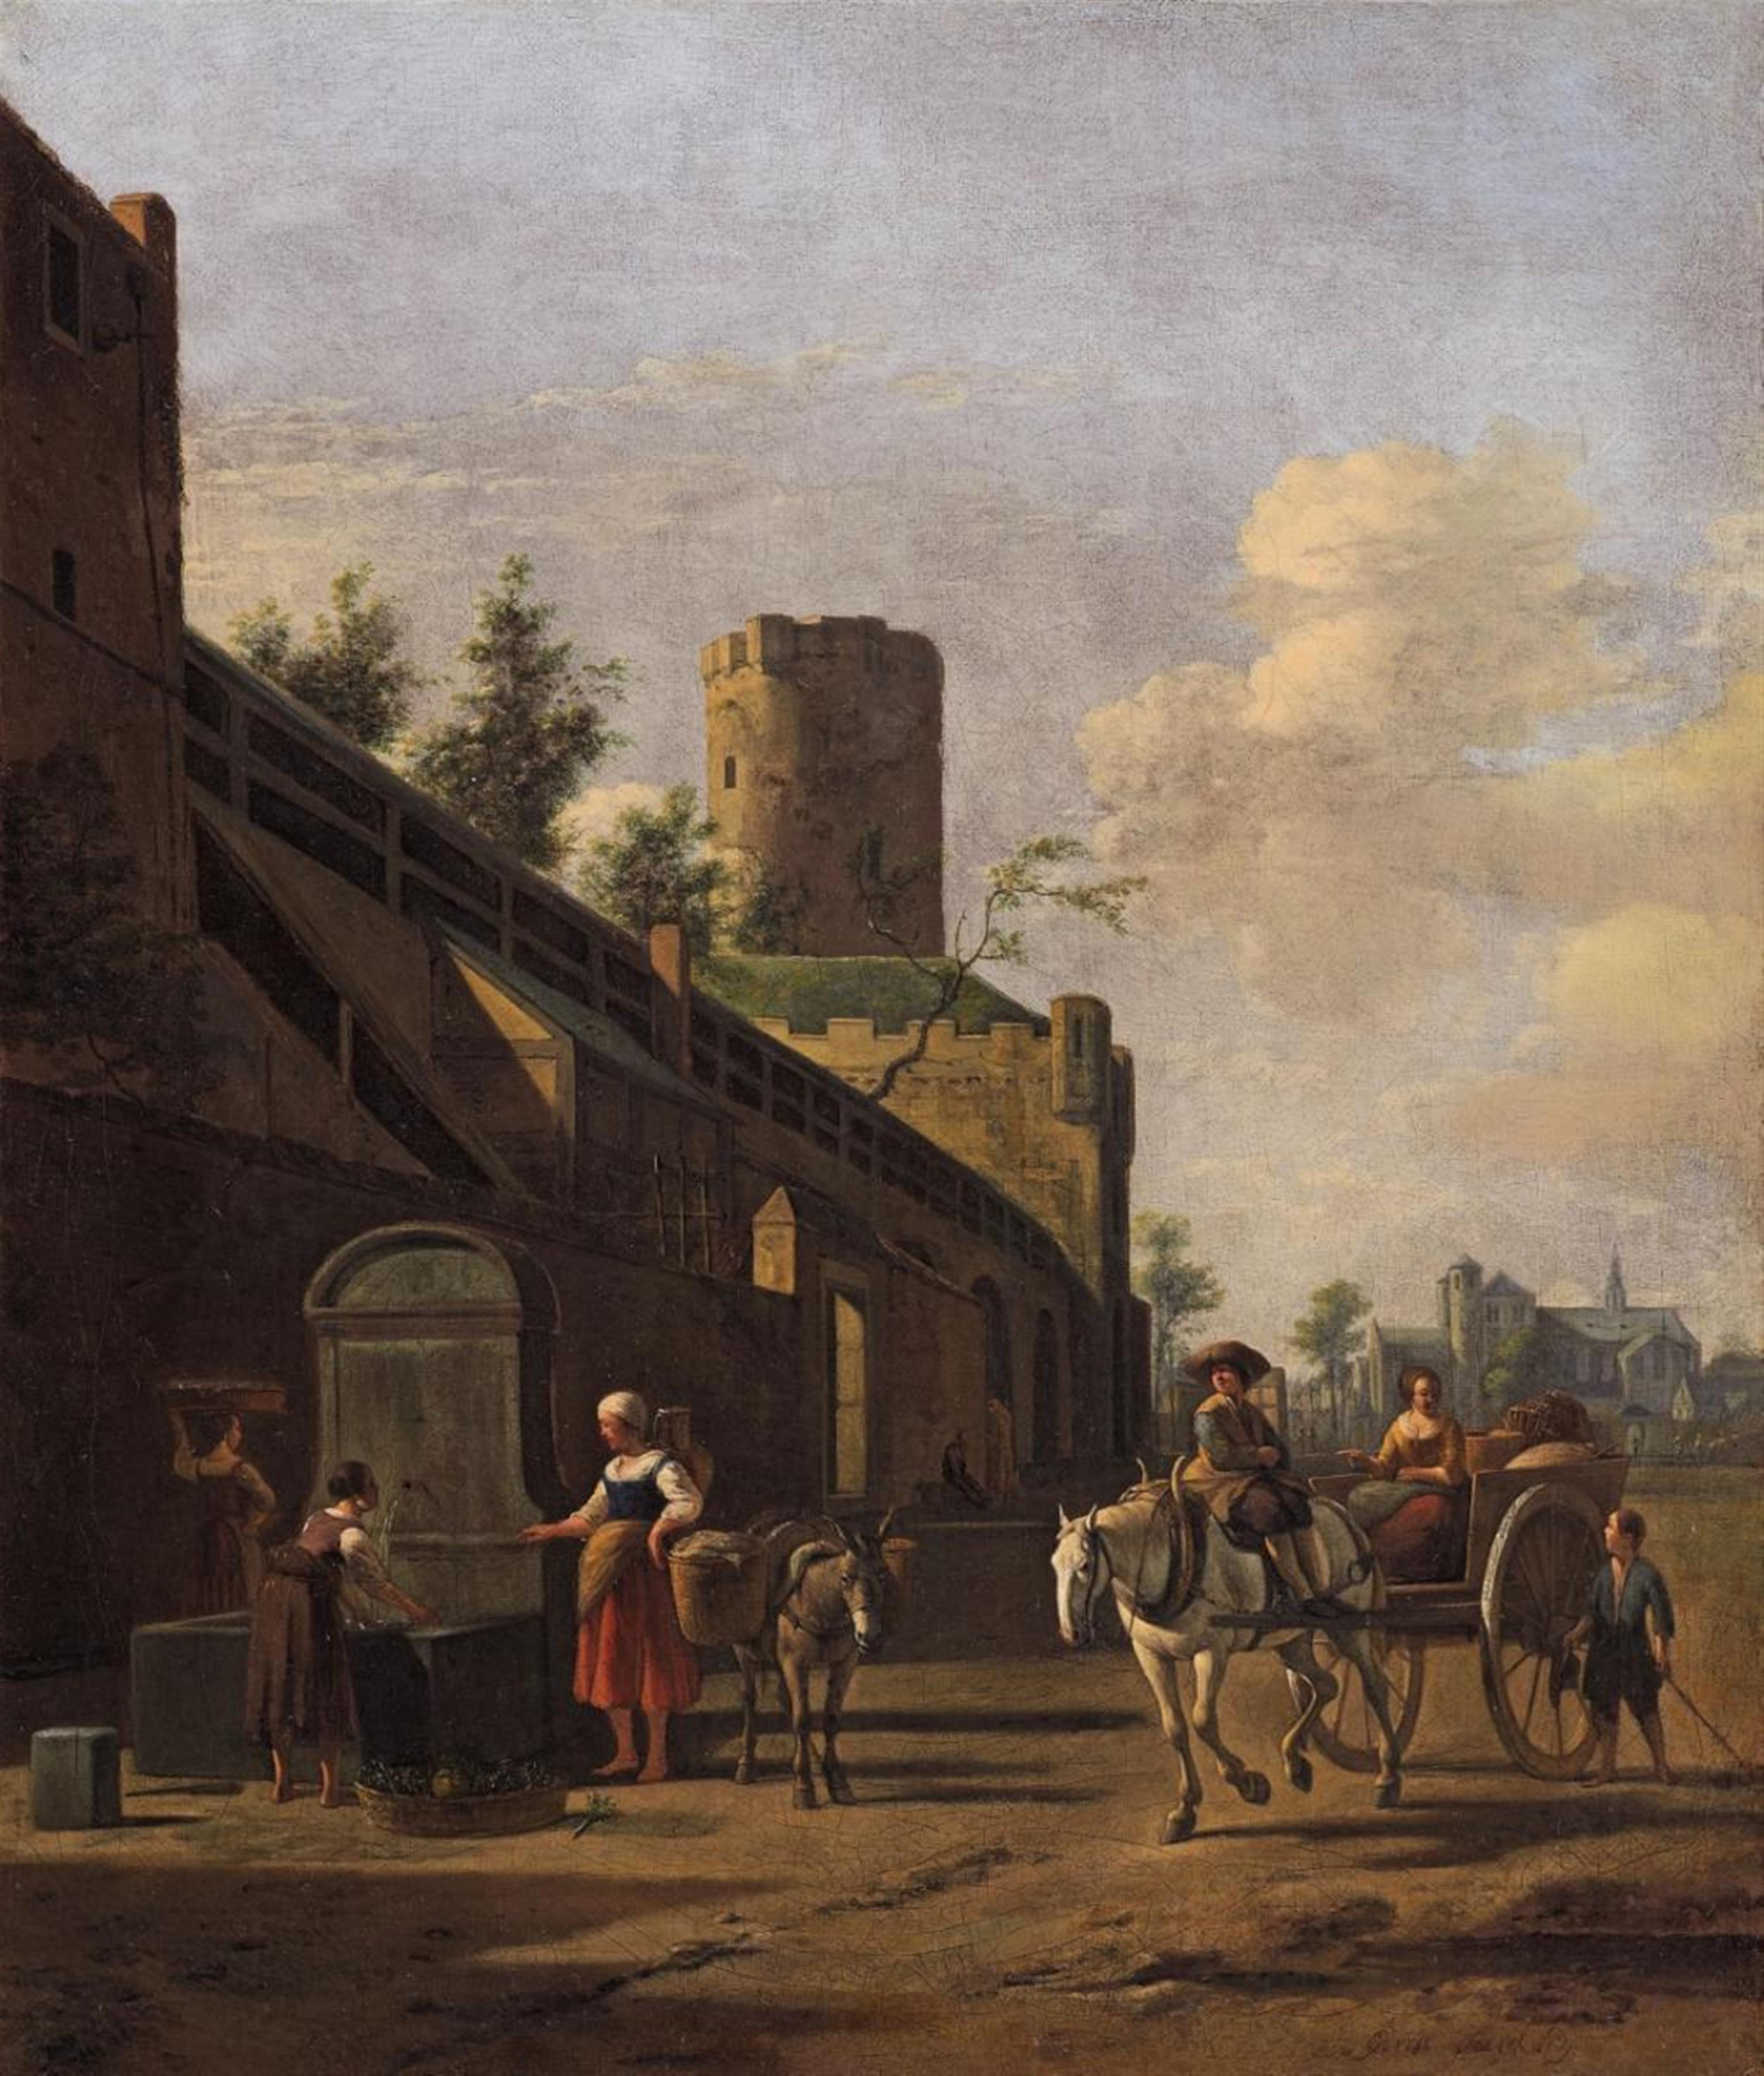 Gerrit Adriaensz. Berckheyde - A HORSE AND CART BY SANKT PANTALEON IN COLOGNE - image-1